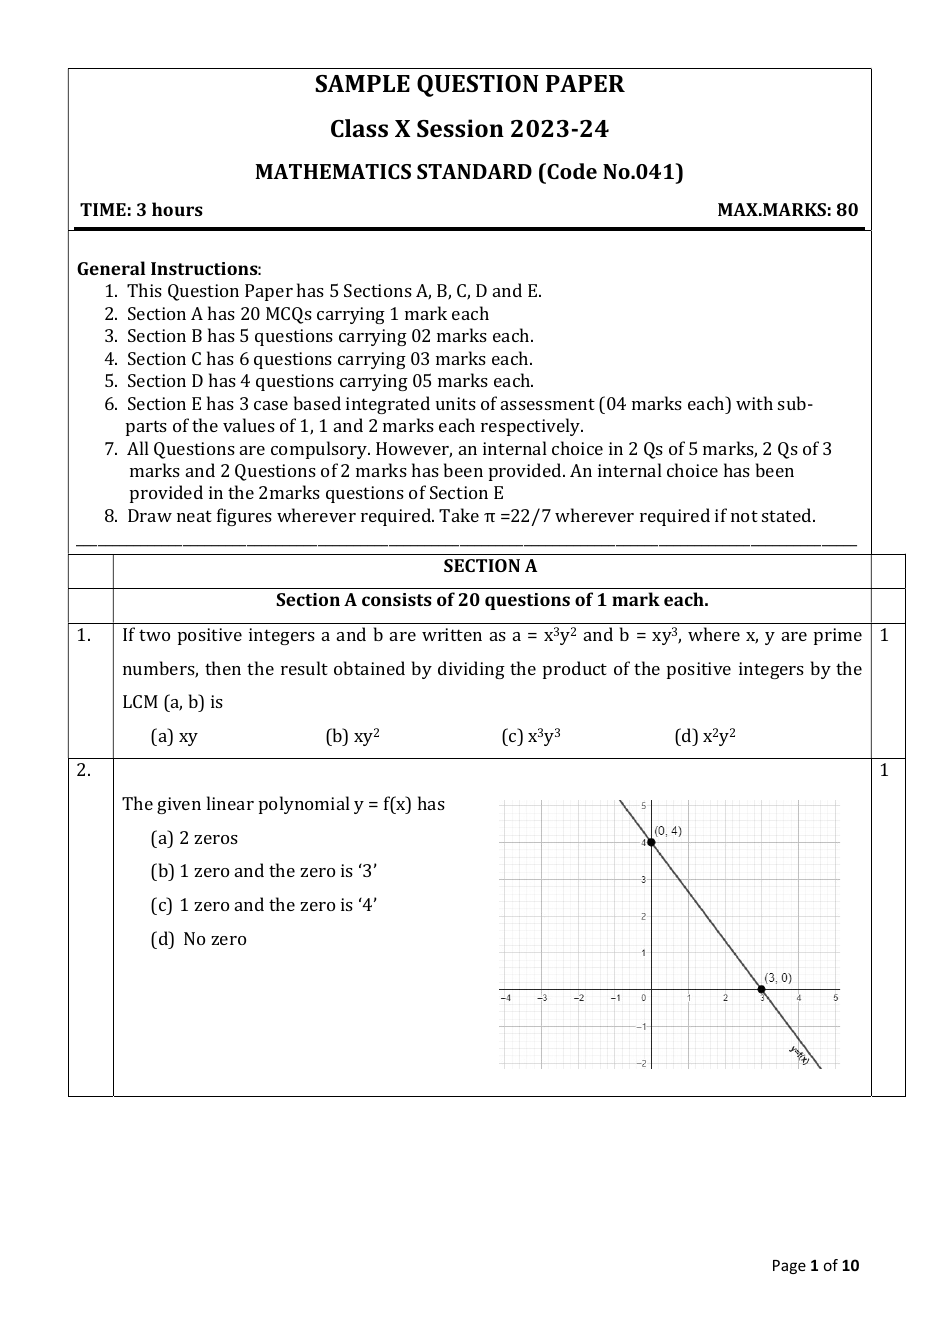 Sample Question Paper: Class X Session 2023-24 Mathematics Standard, Page 1